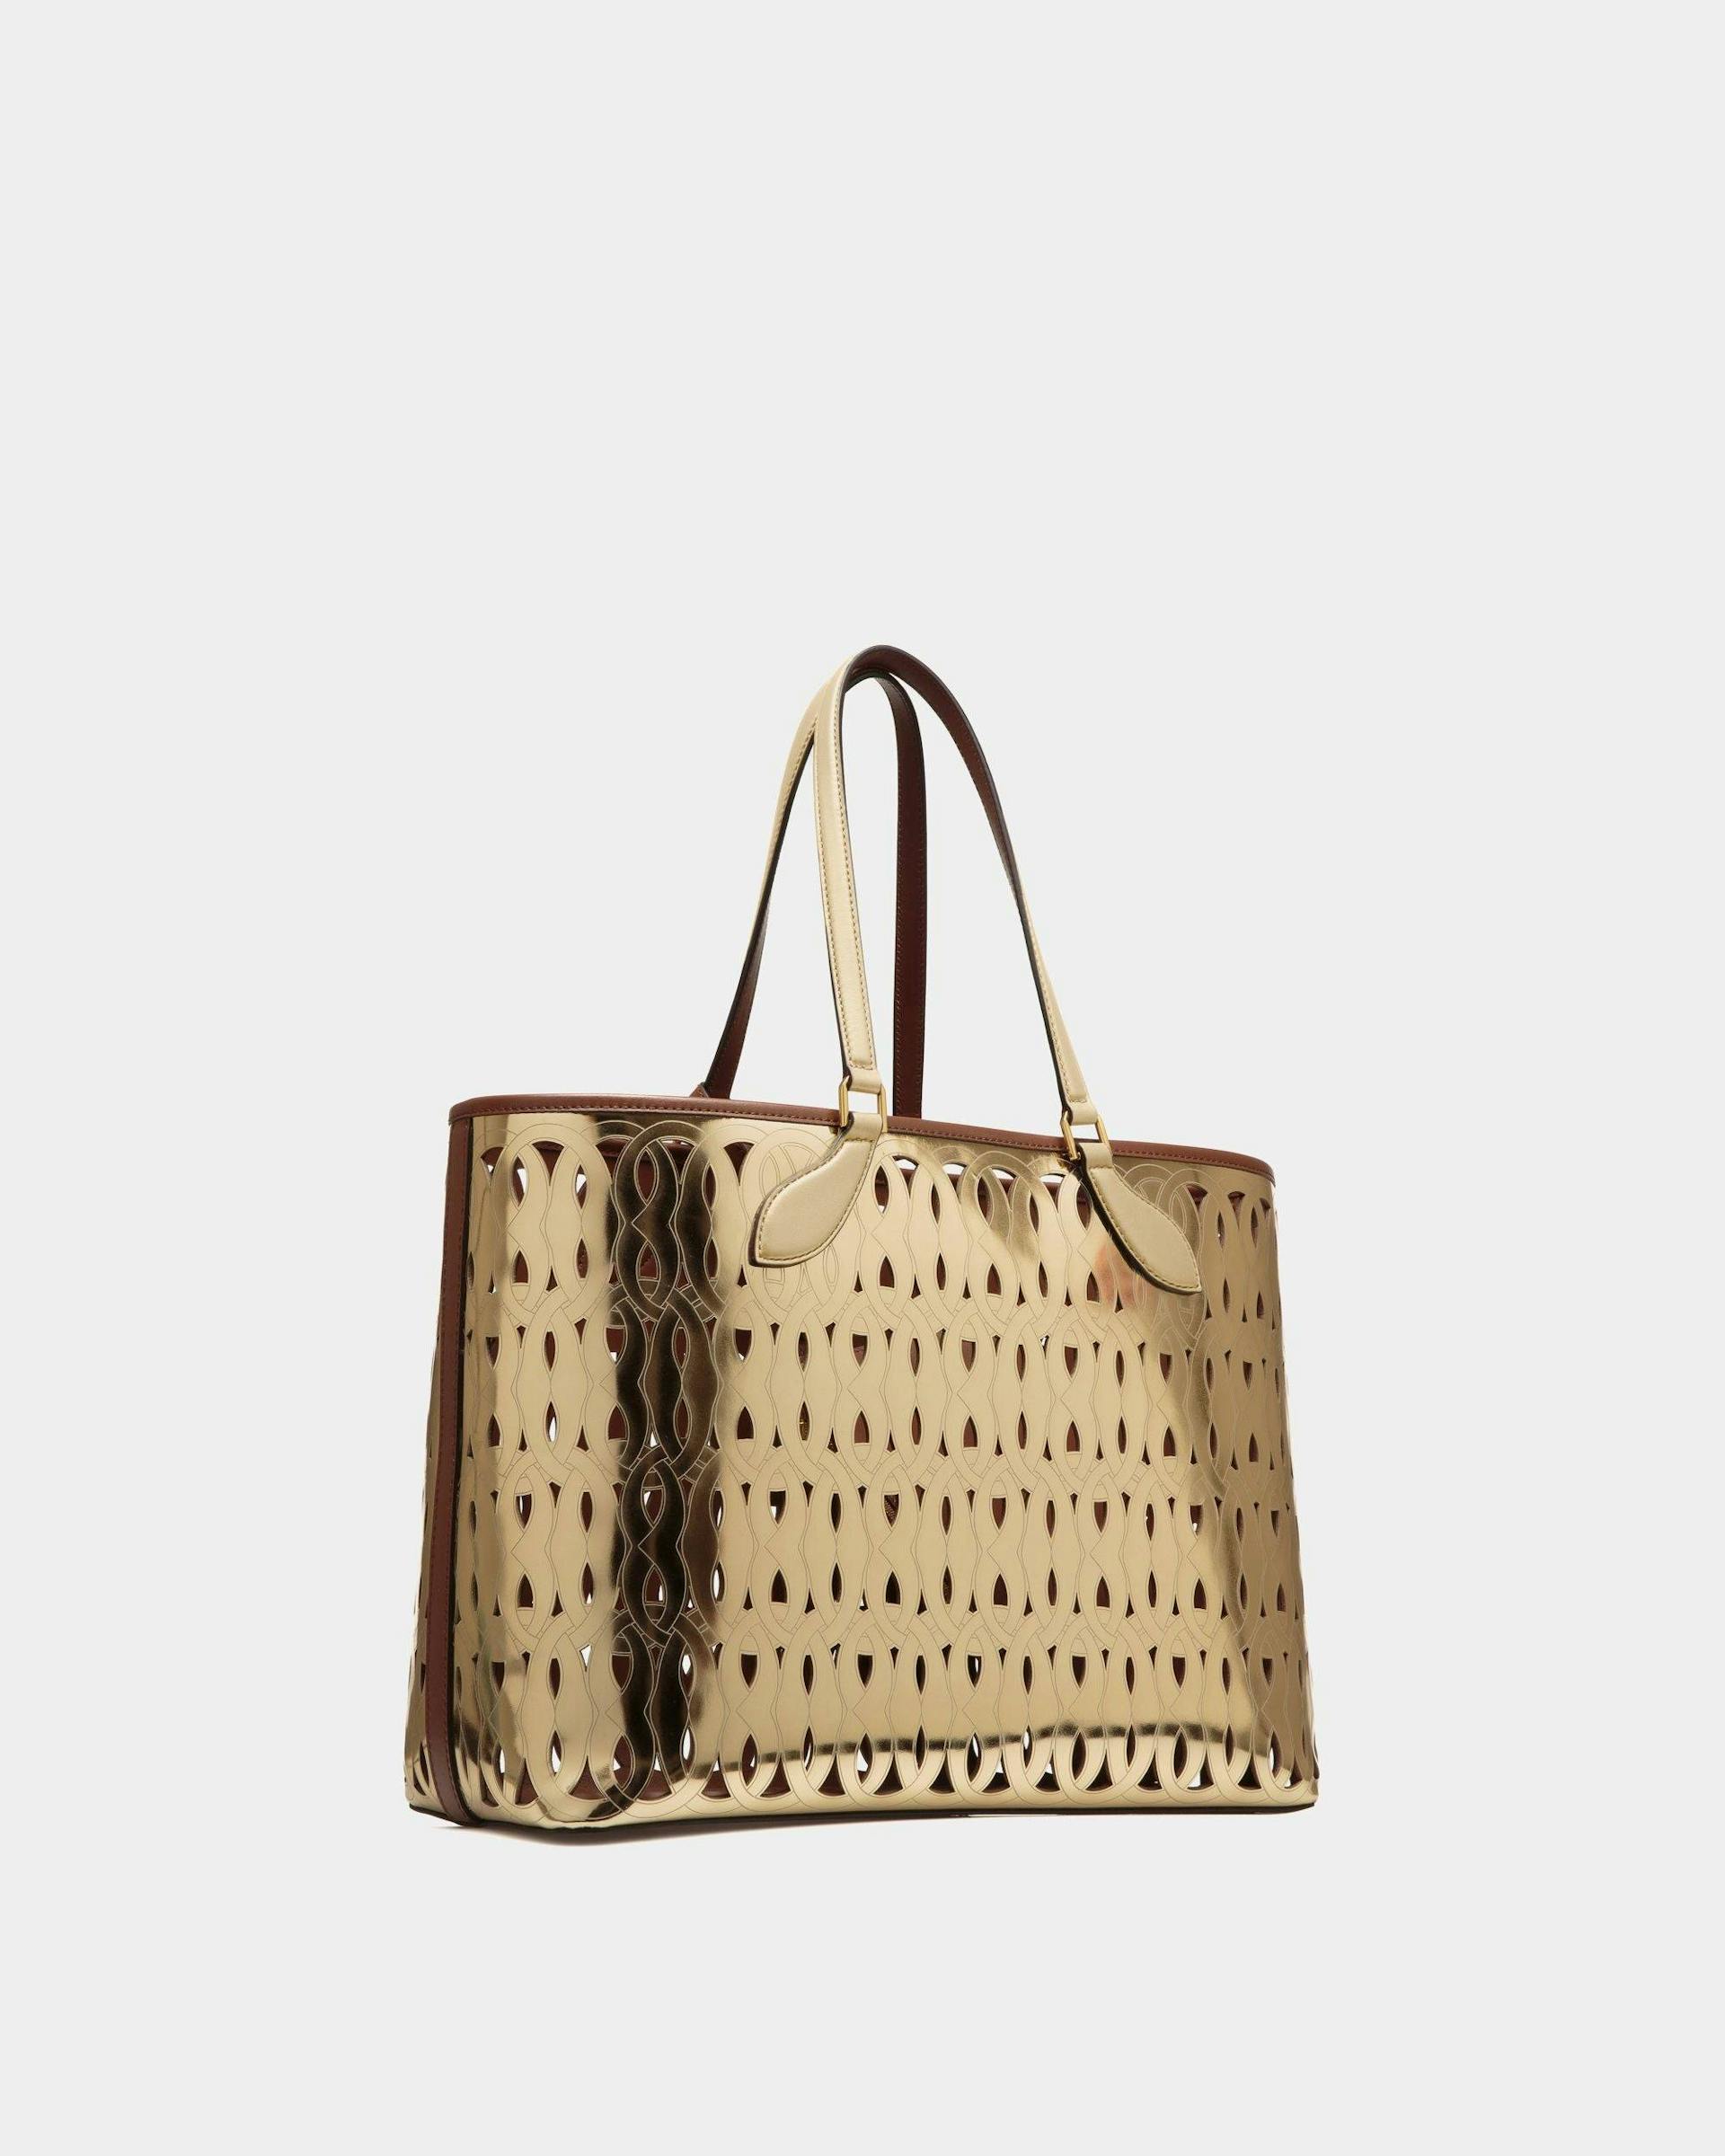 Women's Lago Tote Bag in Patent Leather | Bally | Still Life 3/4 Front